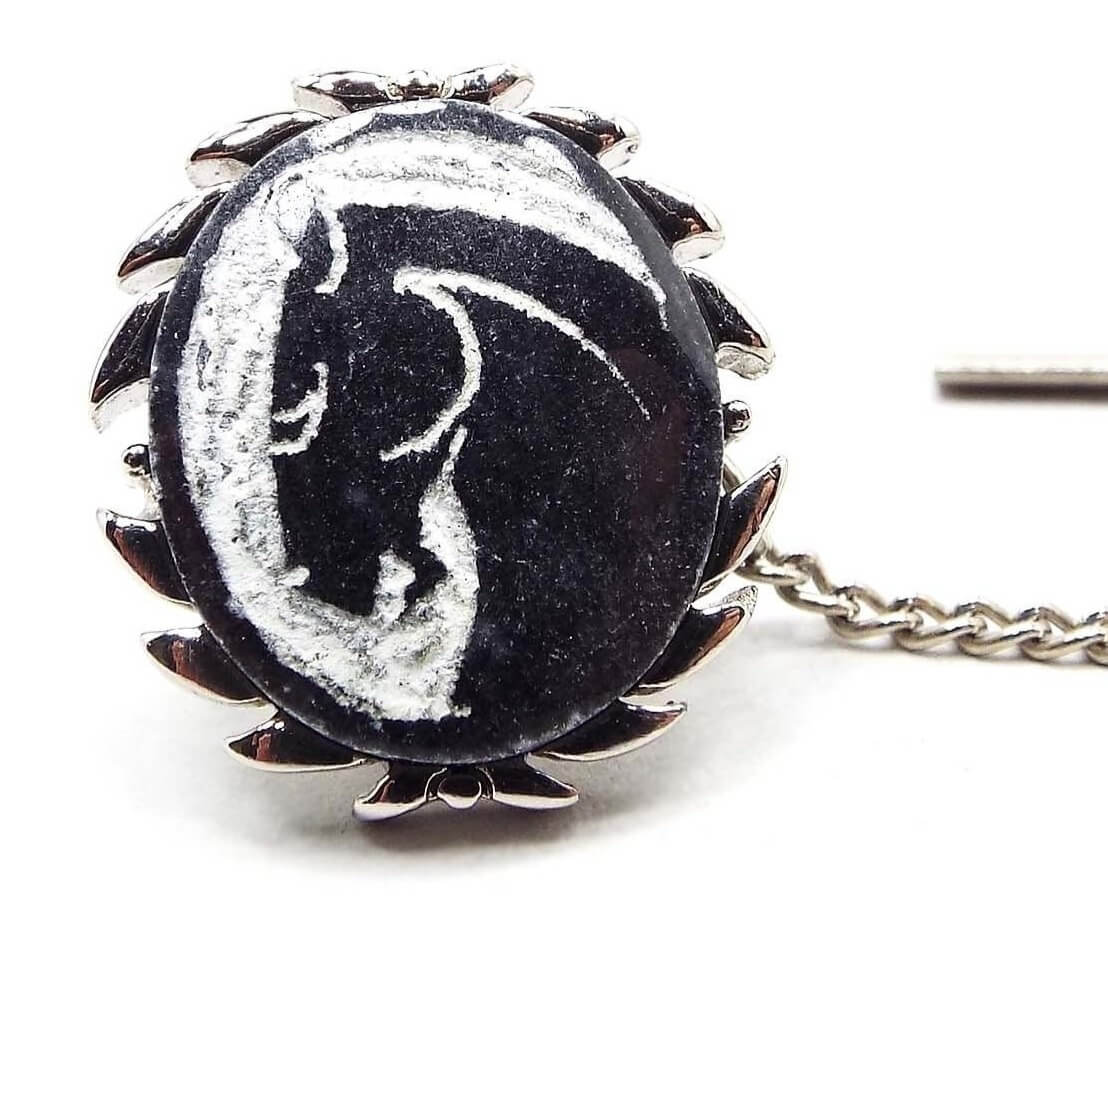 Enlarged front view of the retro vintage Swank carved stone tie tack. The metal is silver tone in color and has a leaf like curved design around the edge. The stone cab is black with white showing what's been carved away and has a horse head cameo.